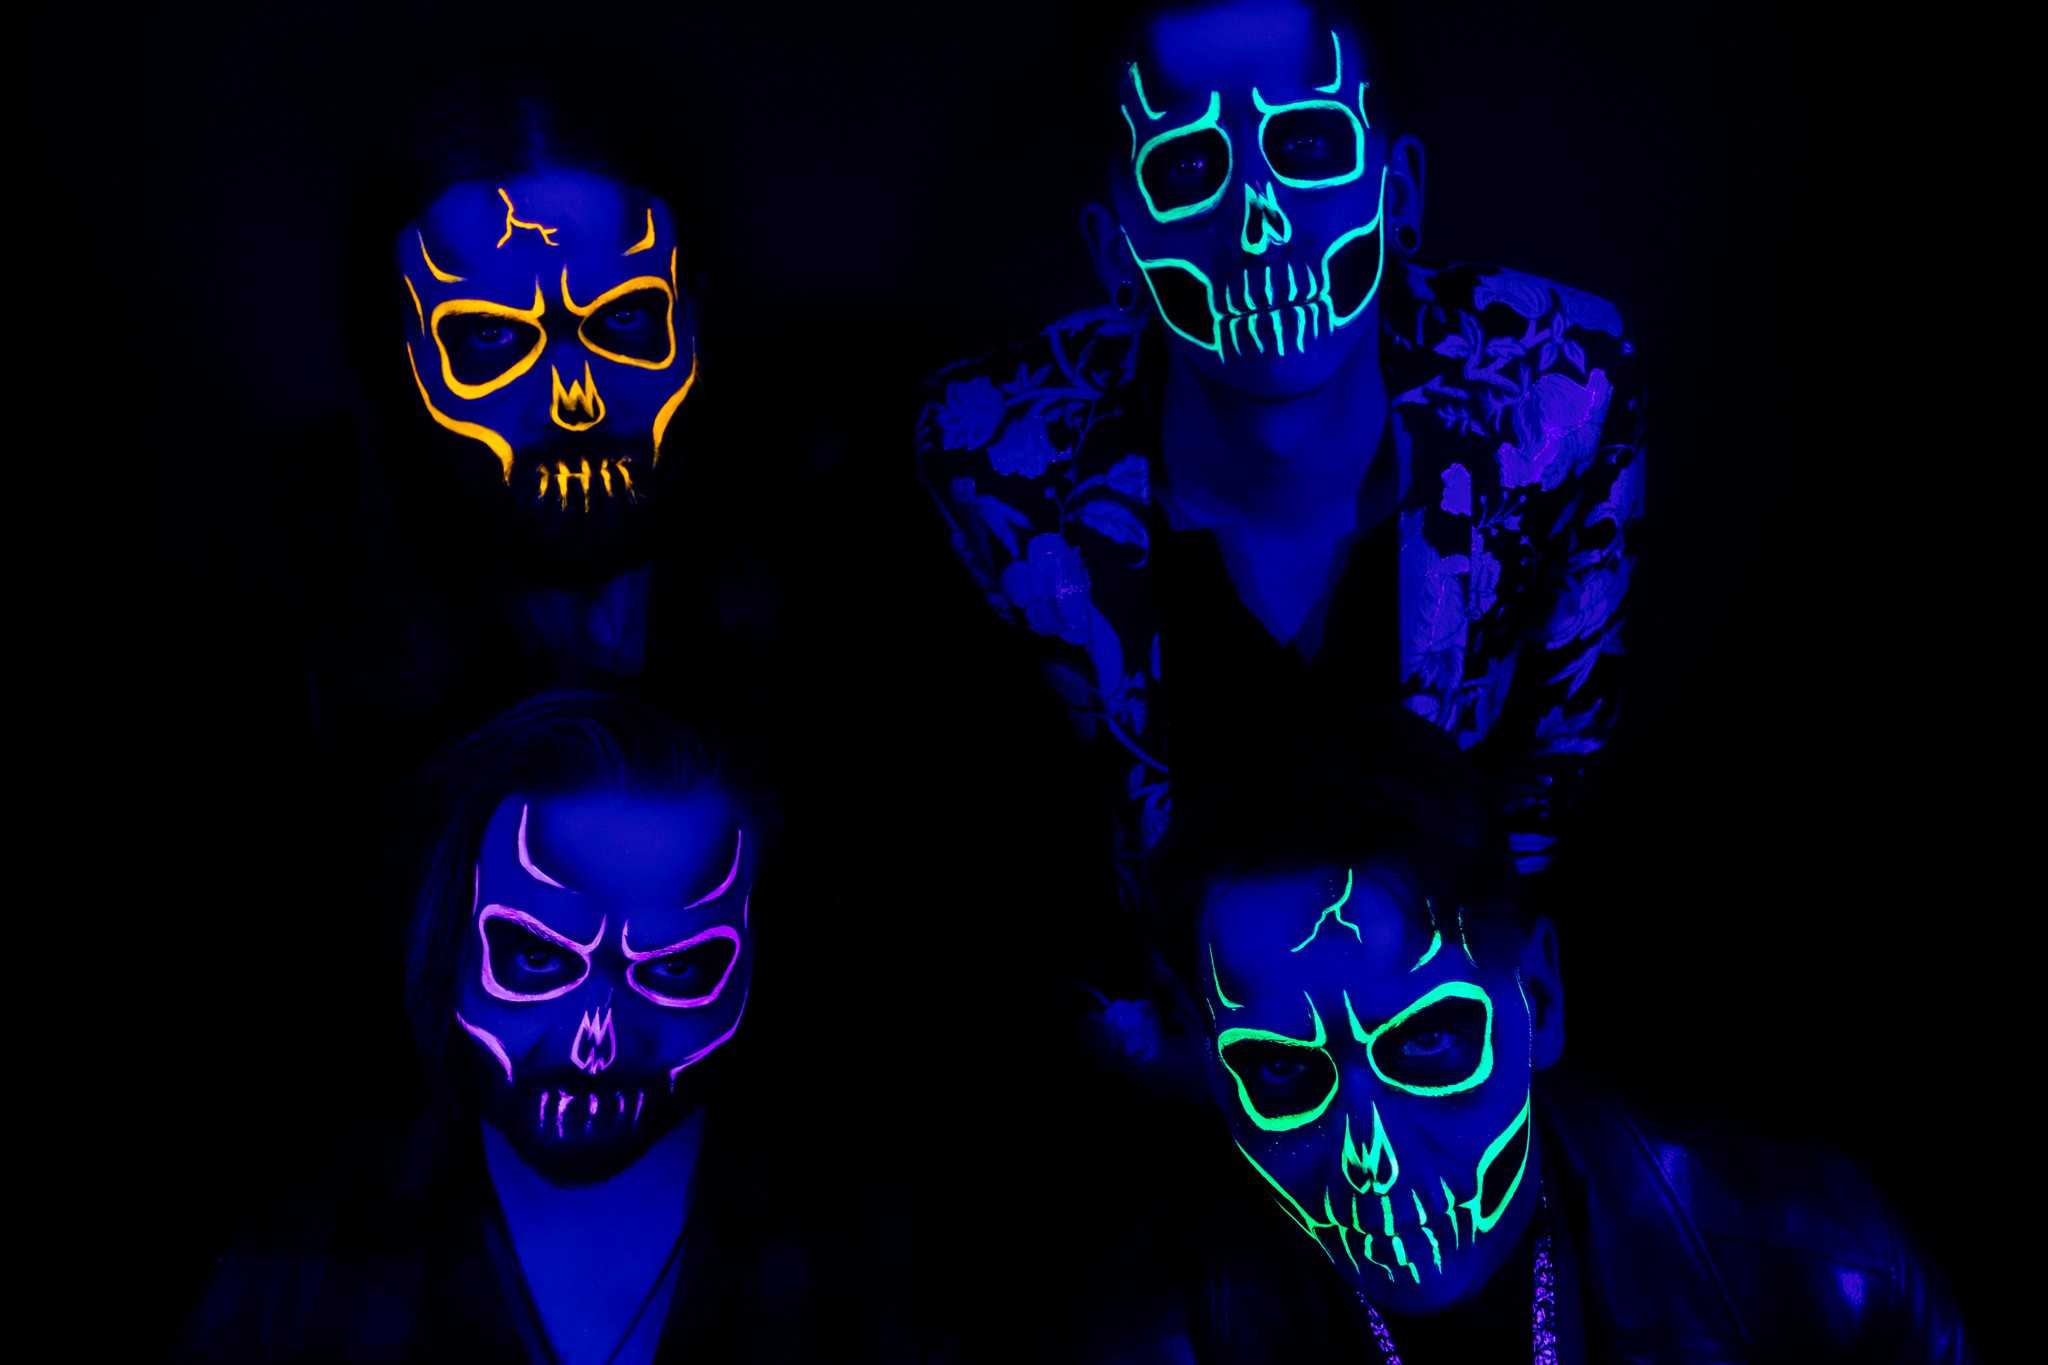 Against a black background, four men stand facing the camera, wearing UV-reactive skull facepaint